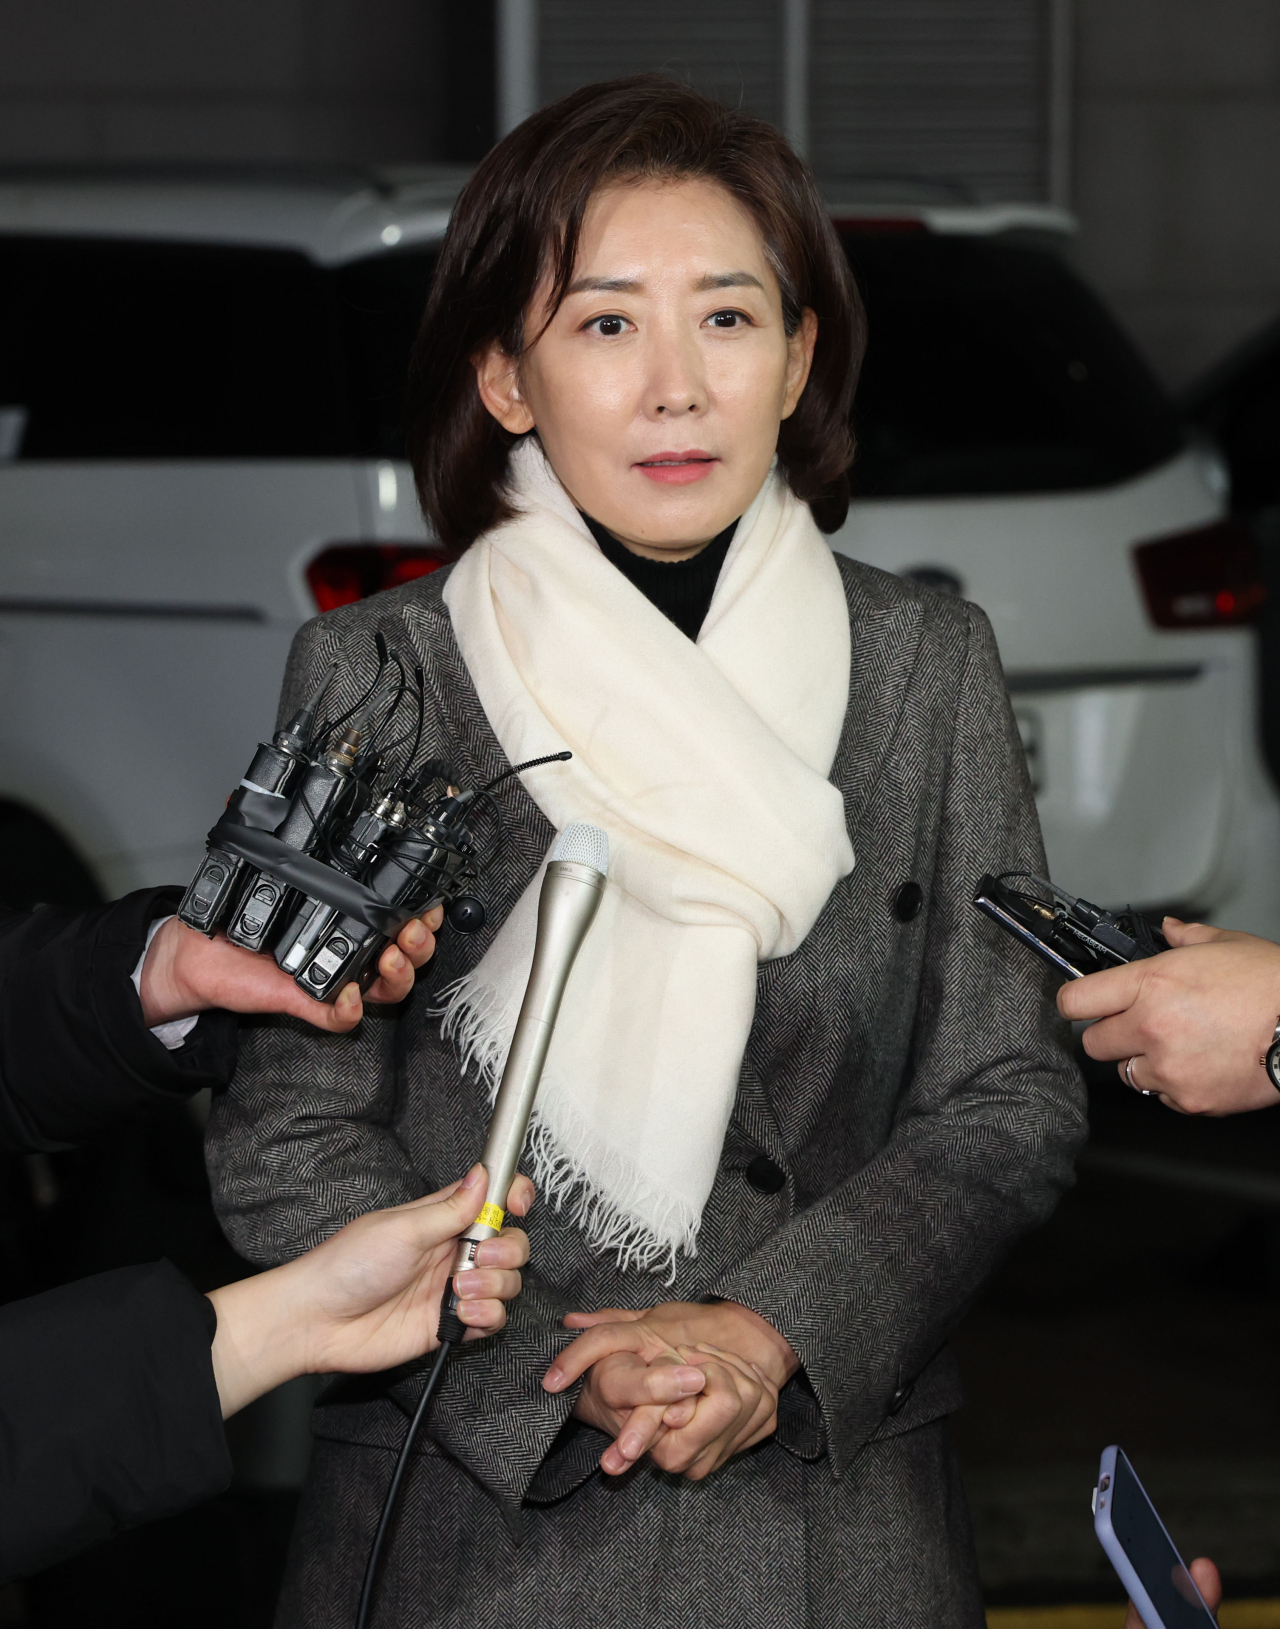 Former four-term lawmaker Na Kyung-won (center) answers reporters' questions before she meets with Seoul Mayor Oh Se-hoon at a restaurant in Seoul on Monday (Yonhap)